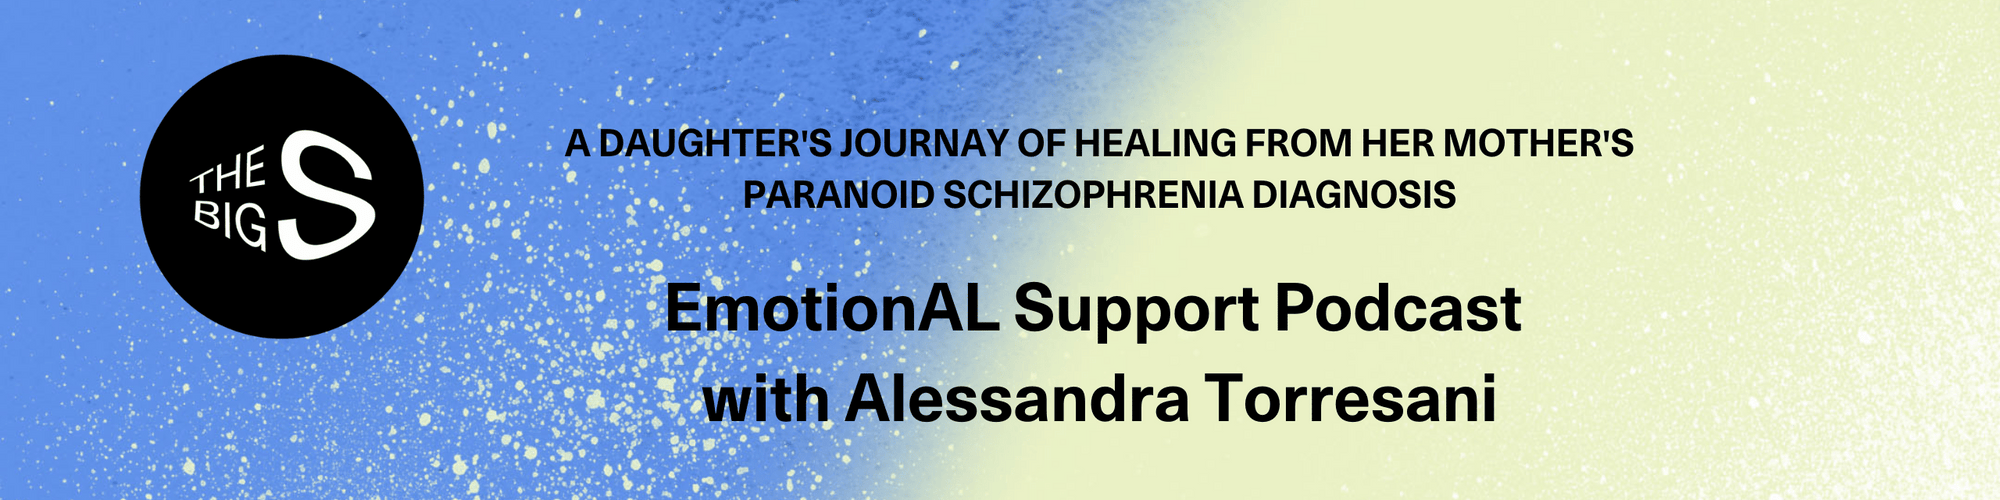 A Daughter’s Journey of Healing from Her Mother’s Paranoid Schizophrenia Diagnosis